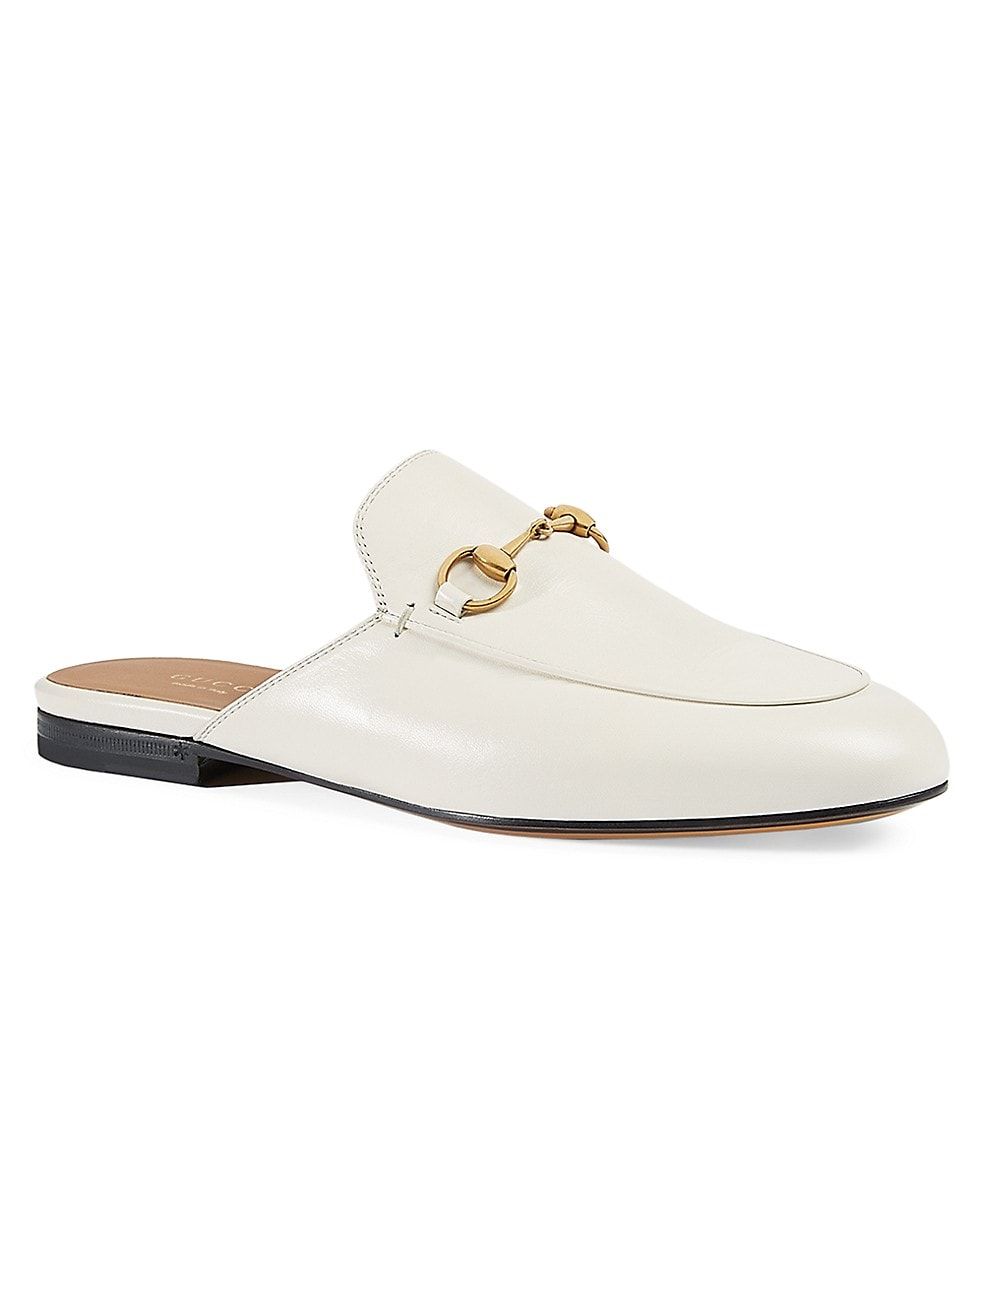 Gucci Princetown Leather Slipper | Saks Fifth Avenue